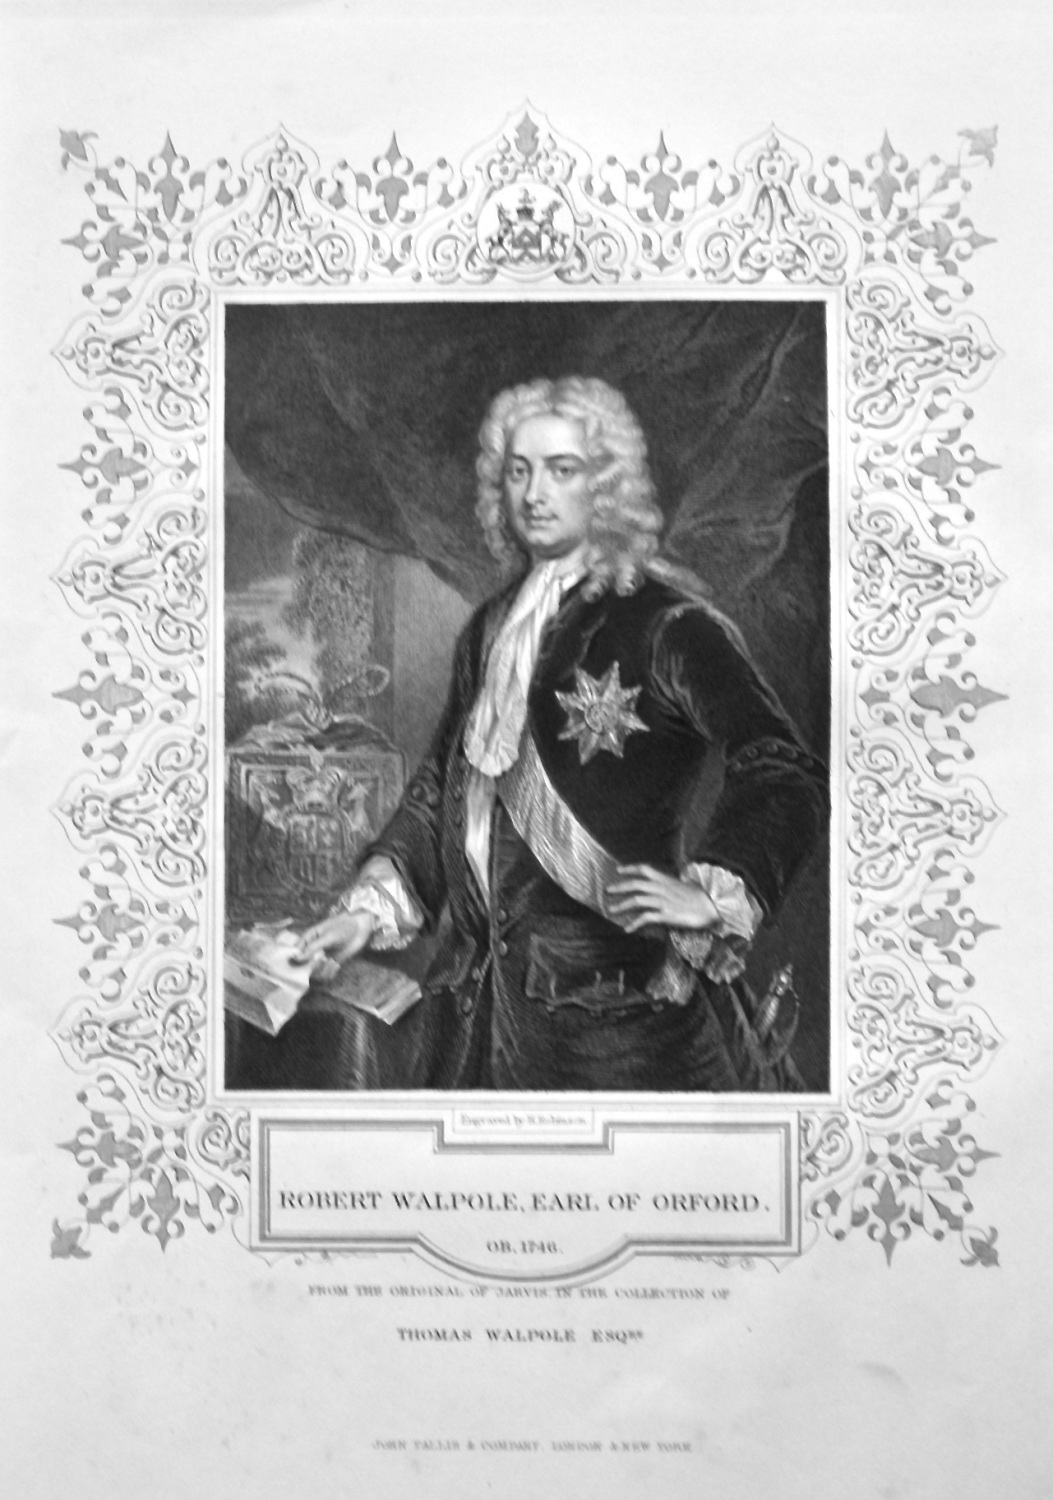 Robert Walpole, Earl of Orford. OB. 1746.  From the original of Jarvis, in 